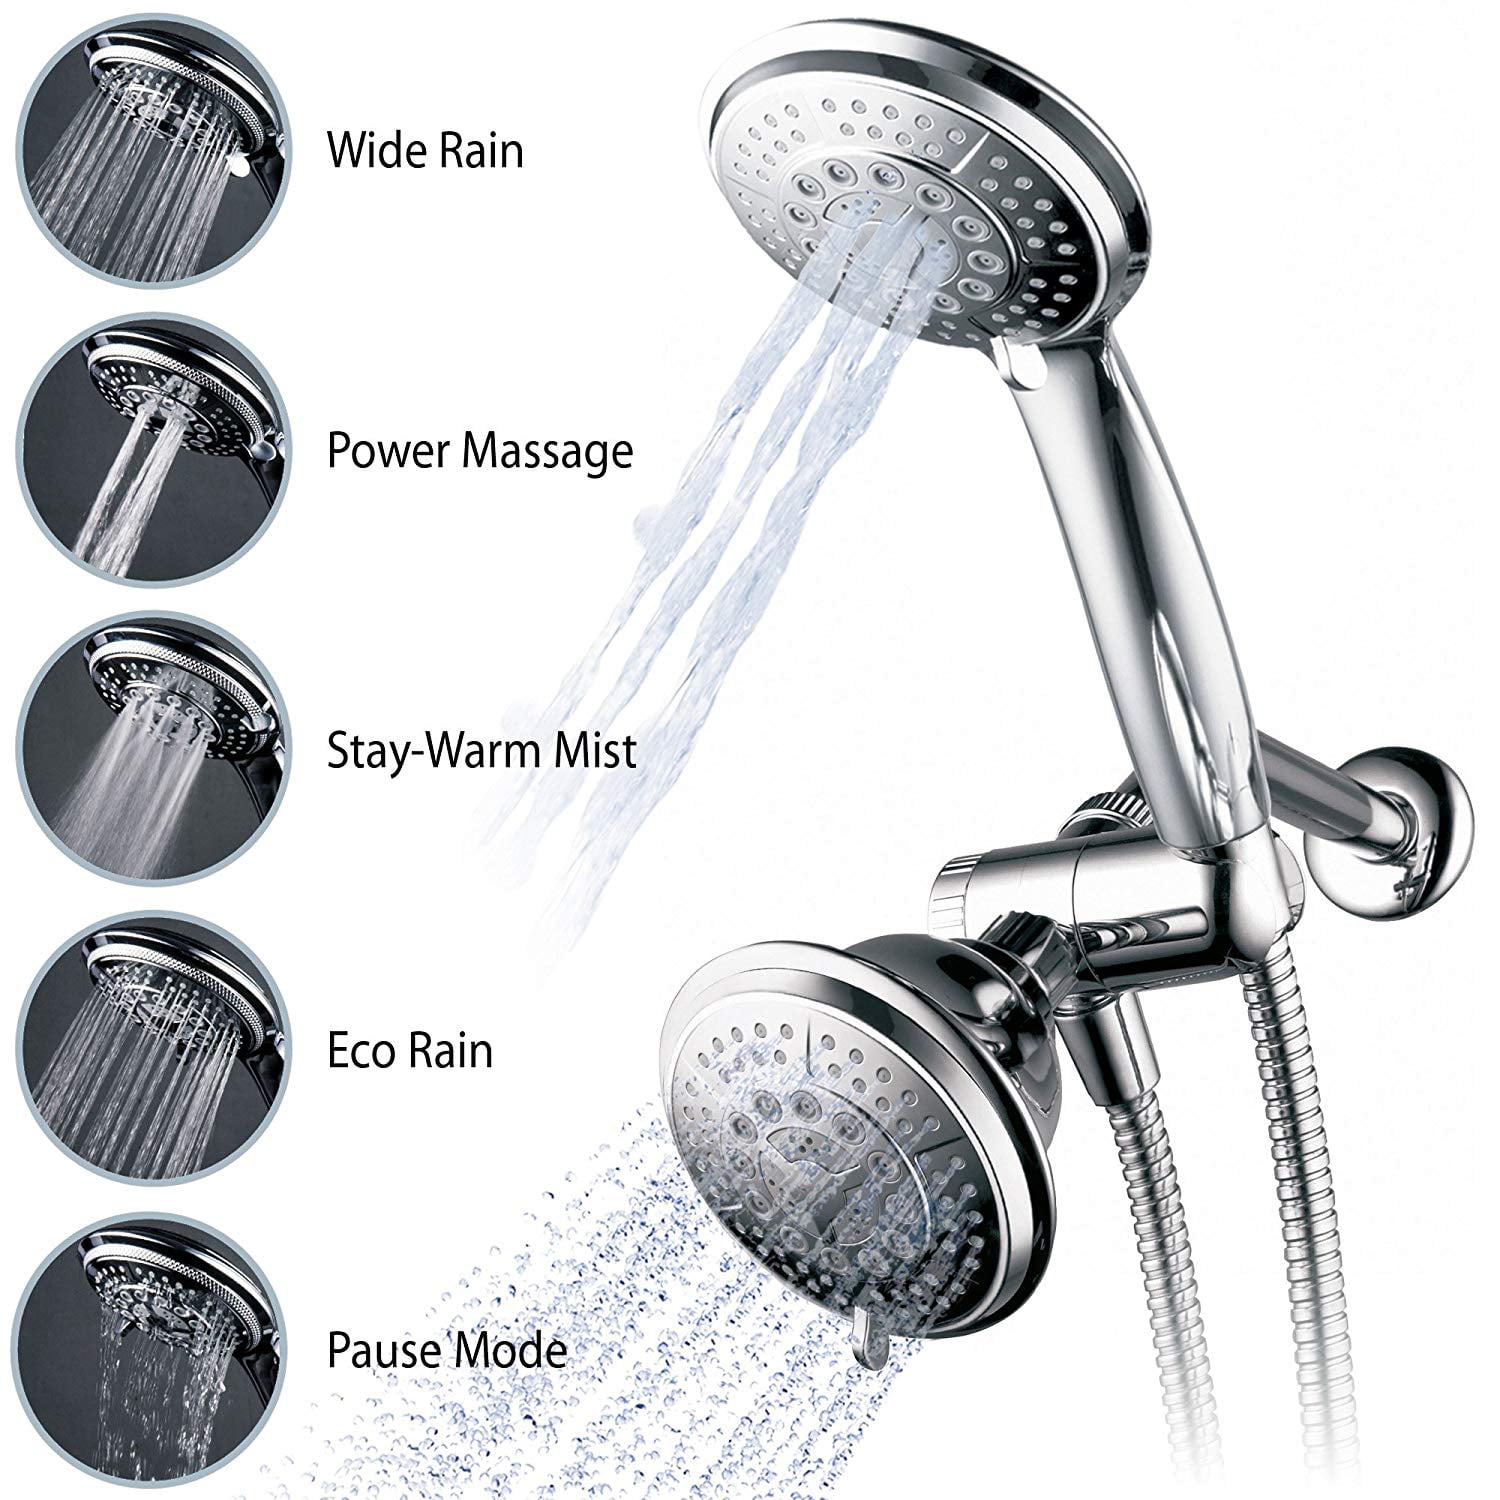 TRIPHIL 5 in 1 Rainfall Shower Head Combo Brushed Nickel 9 Inches Showerhead Shower Arm with Flange and Teflon Tape Handheld Shower Head 3-Way Spray Massage Spa & Combination 59 Inches Hose